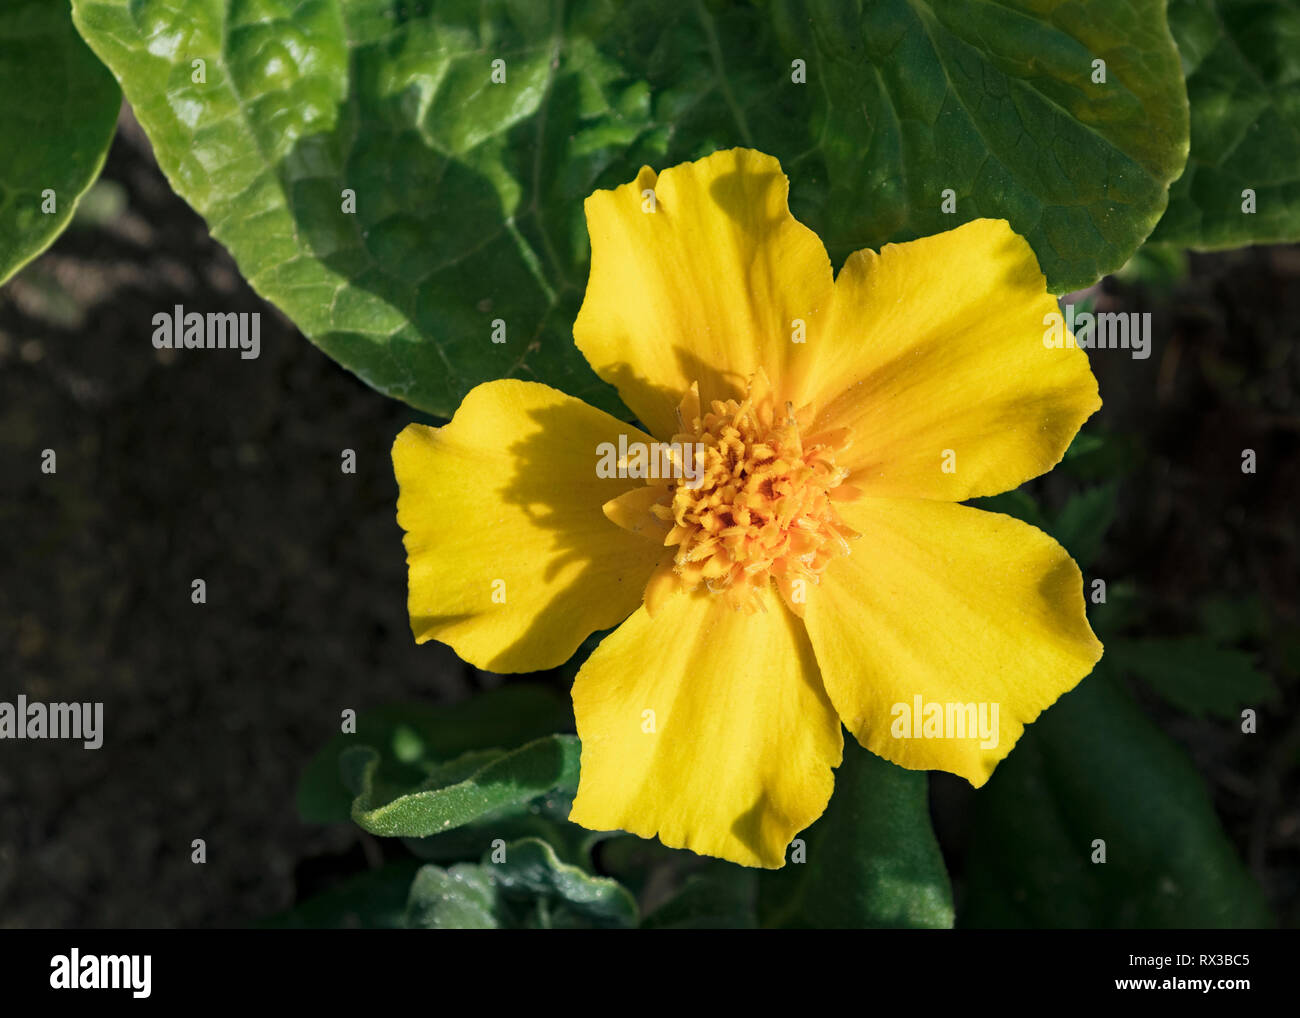 closeup of a yellow dwarf marigold with five petals surrounded by lettuce and spinach growing a home garden Stock Photo